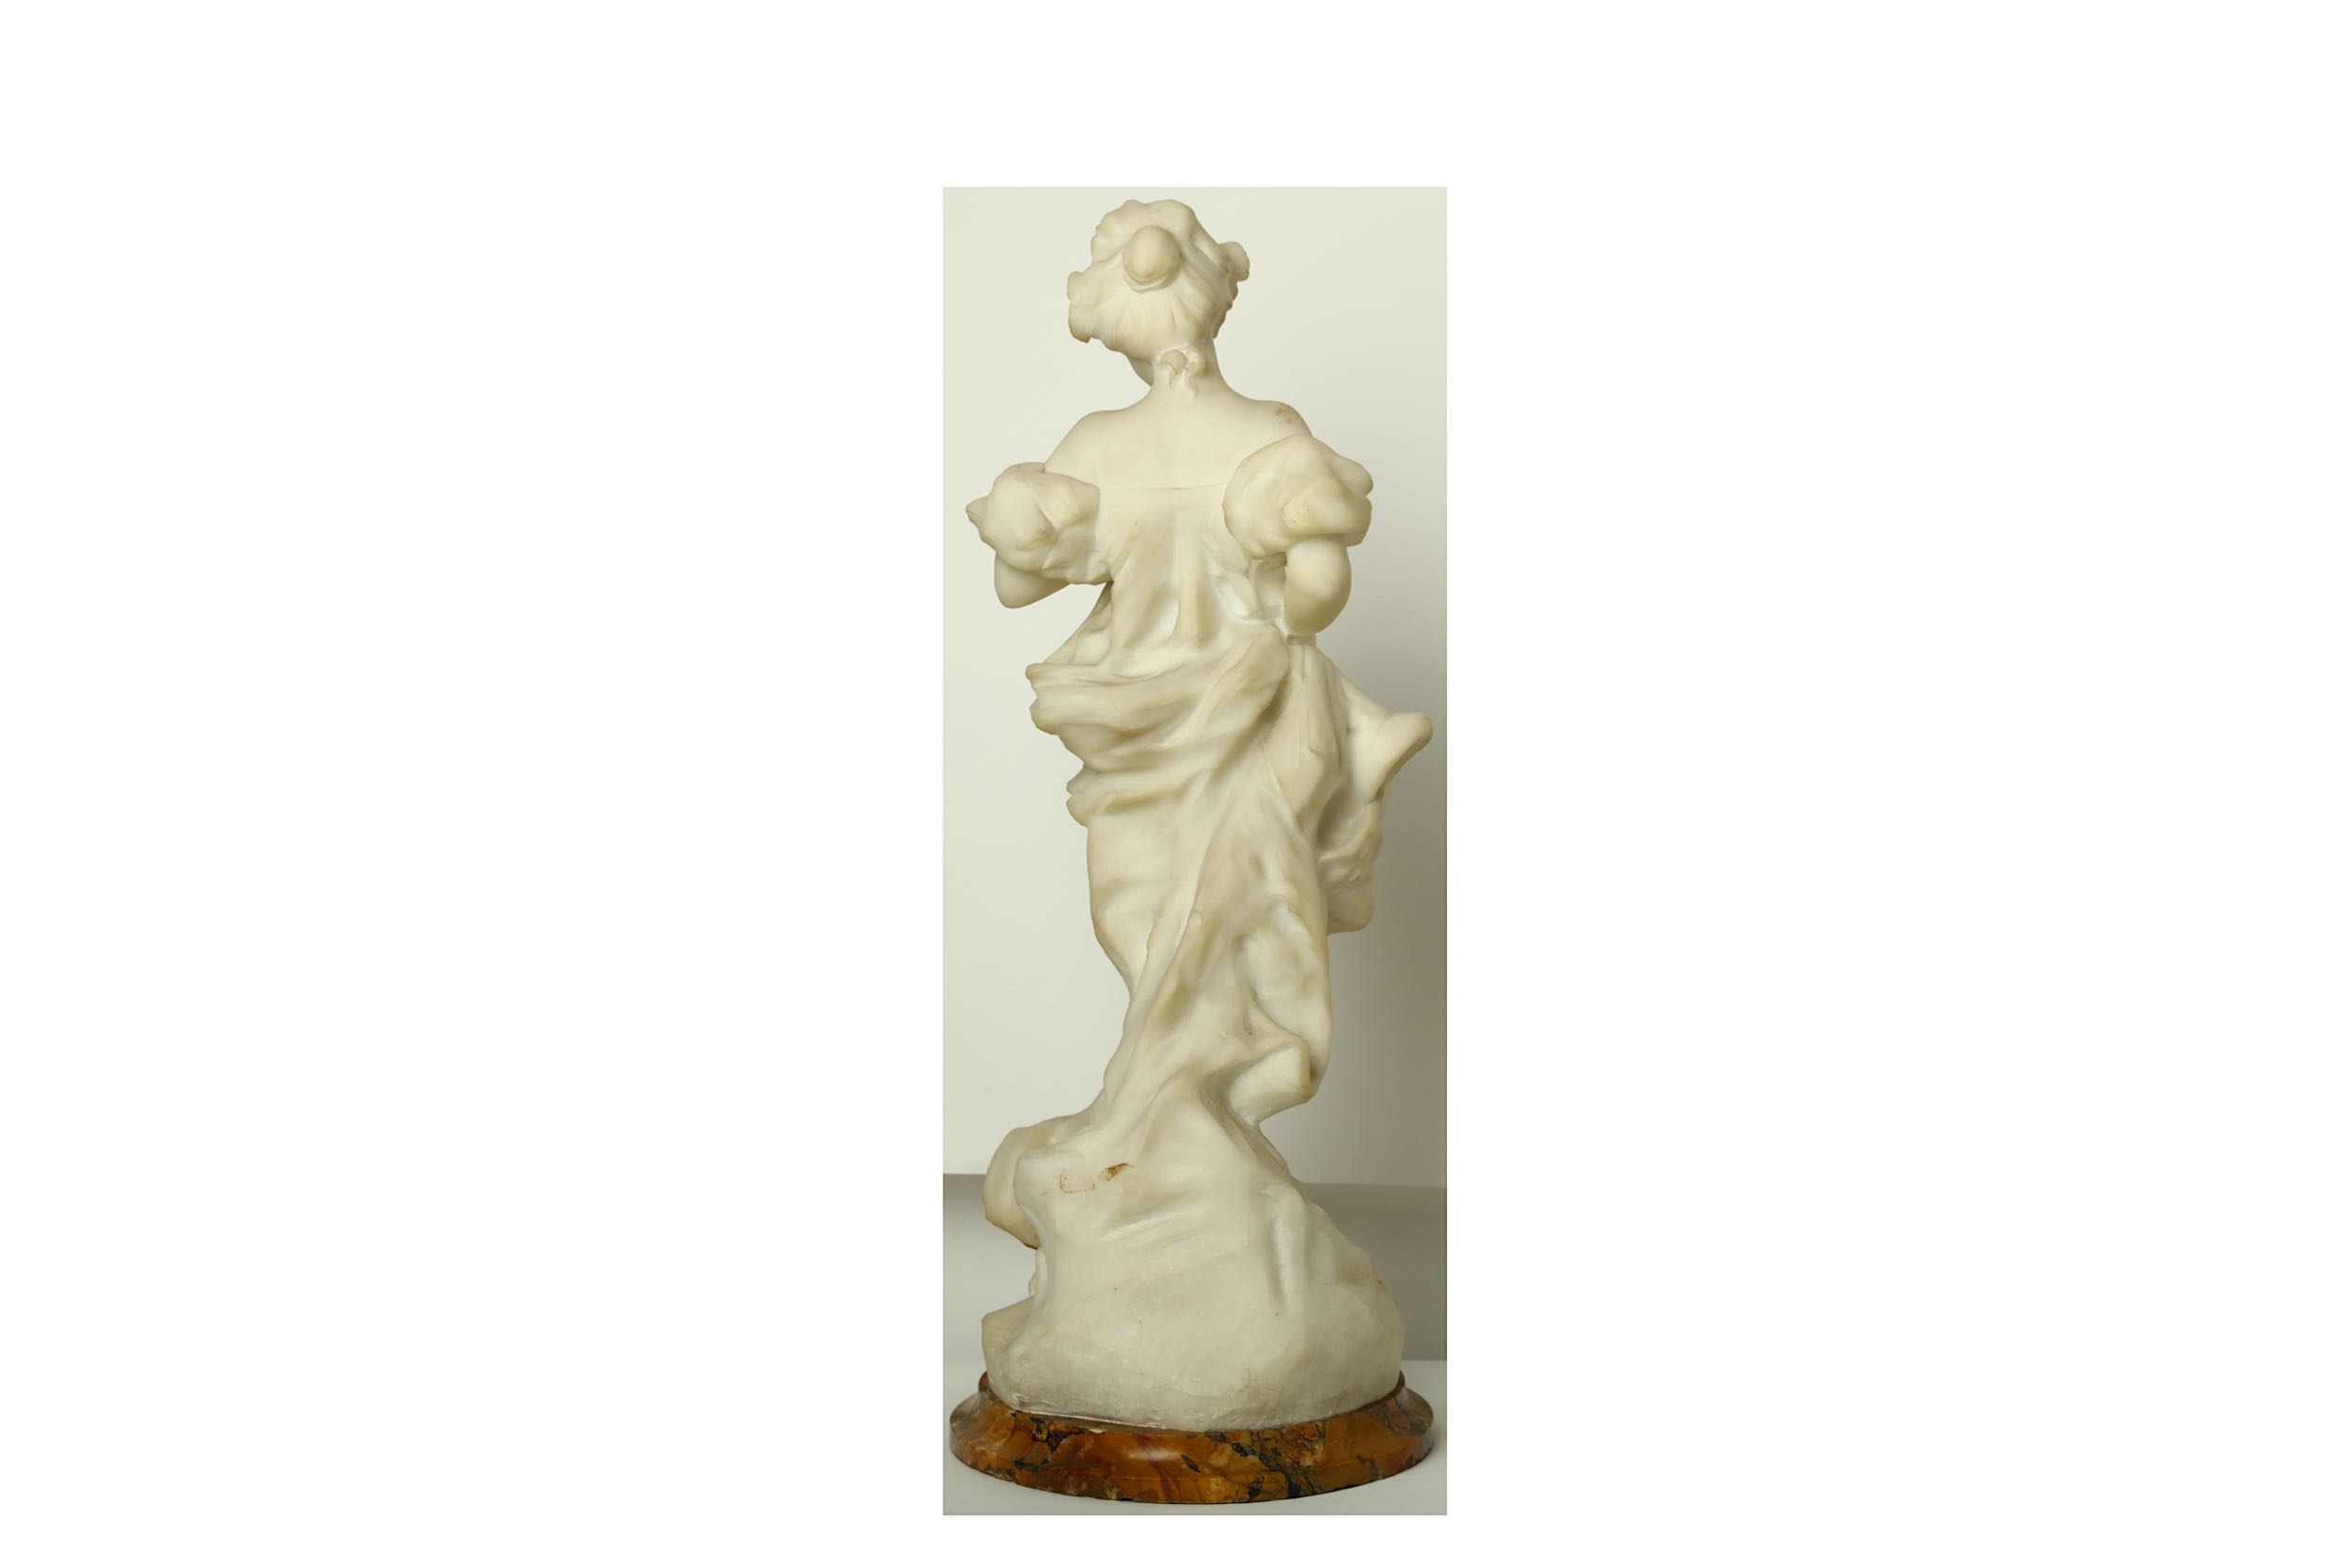 EDOUARD FORTINY (fl.1870-1920), A FRENCH CARVED MARBLE FIGURE OF A LADY. - Image 4 of 4